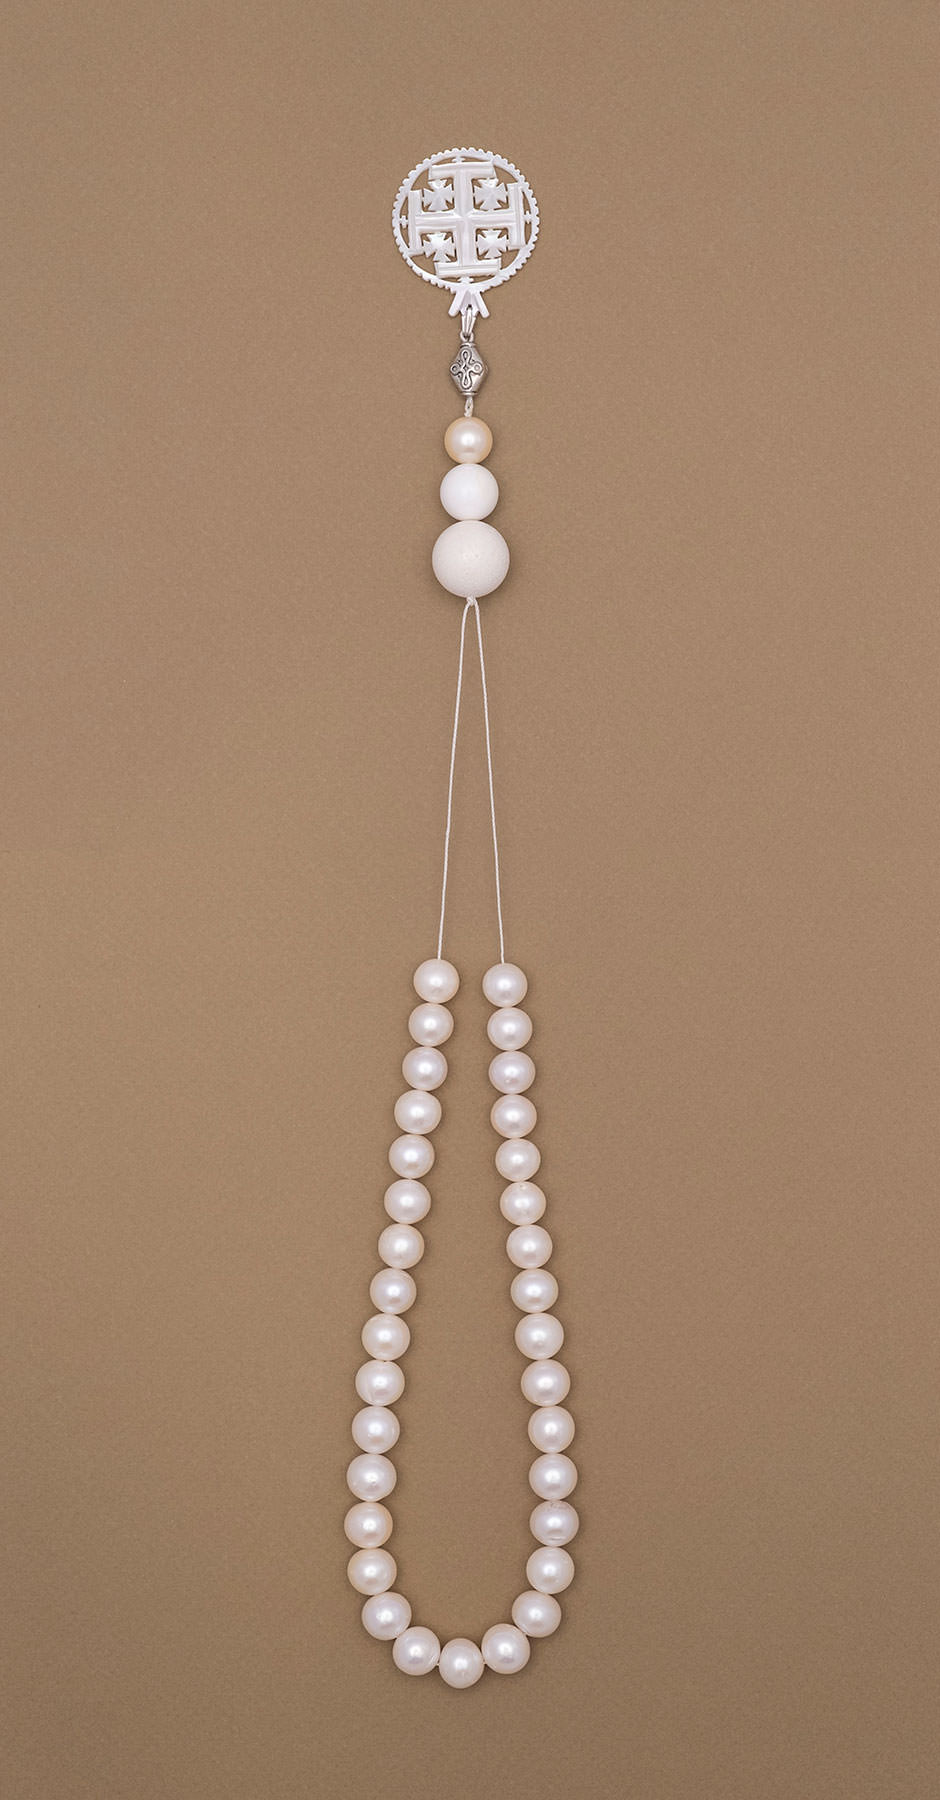 Pearl (decorative element made of Mother of Pearl)